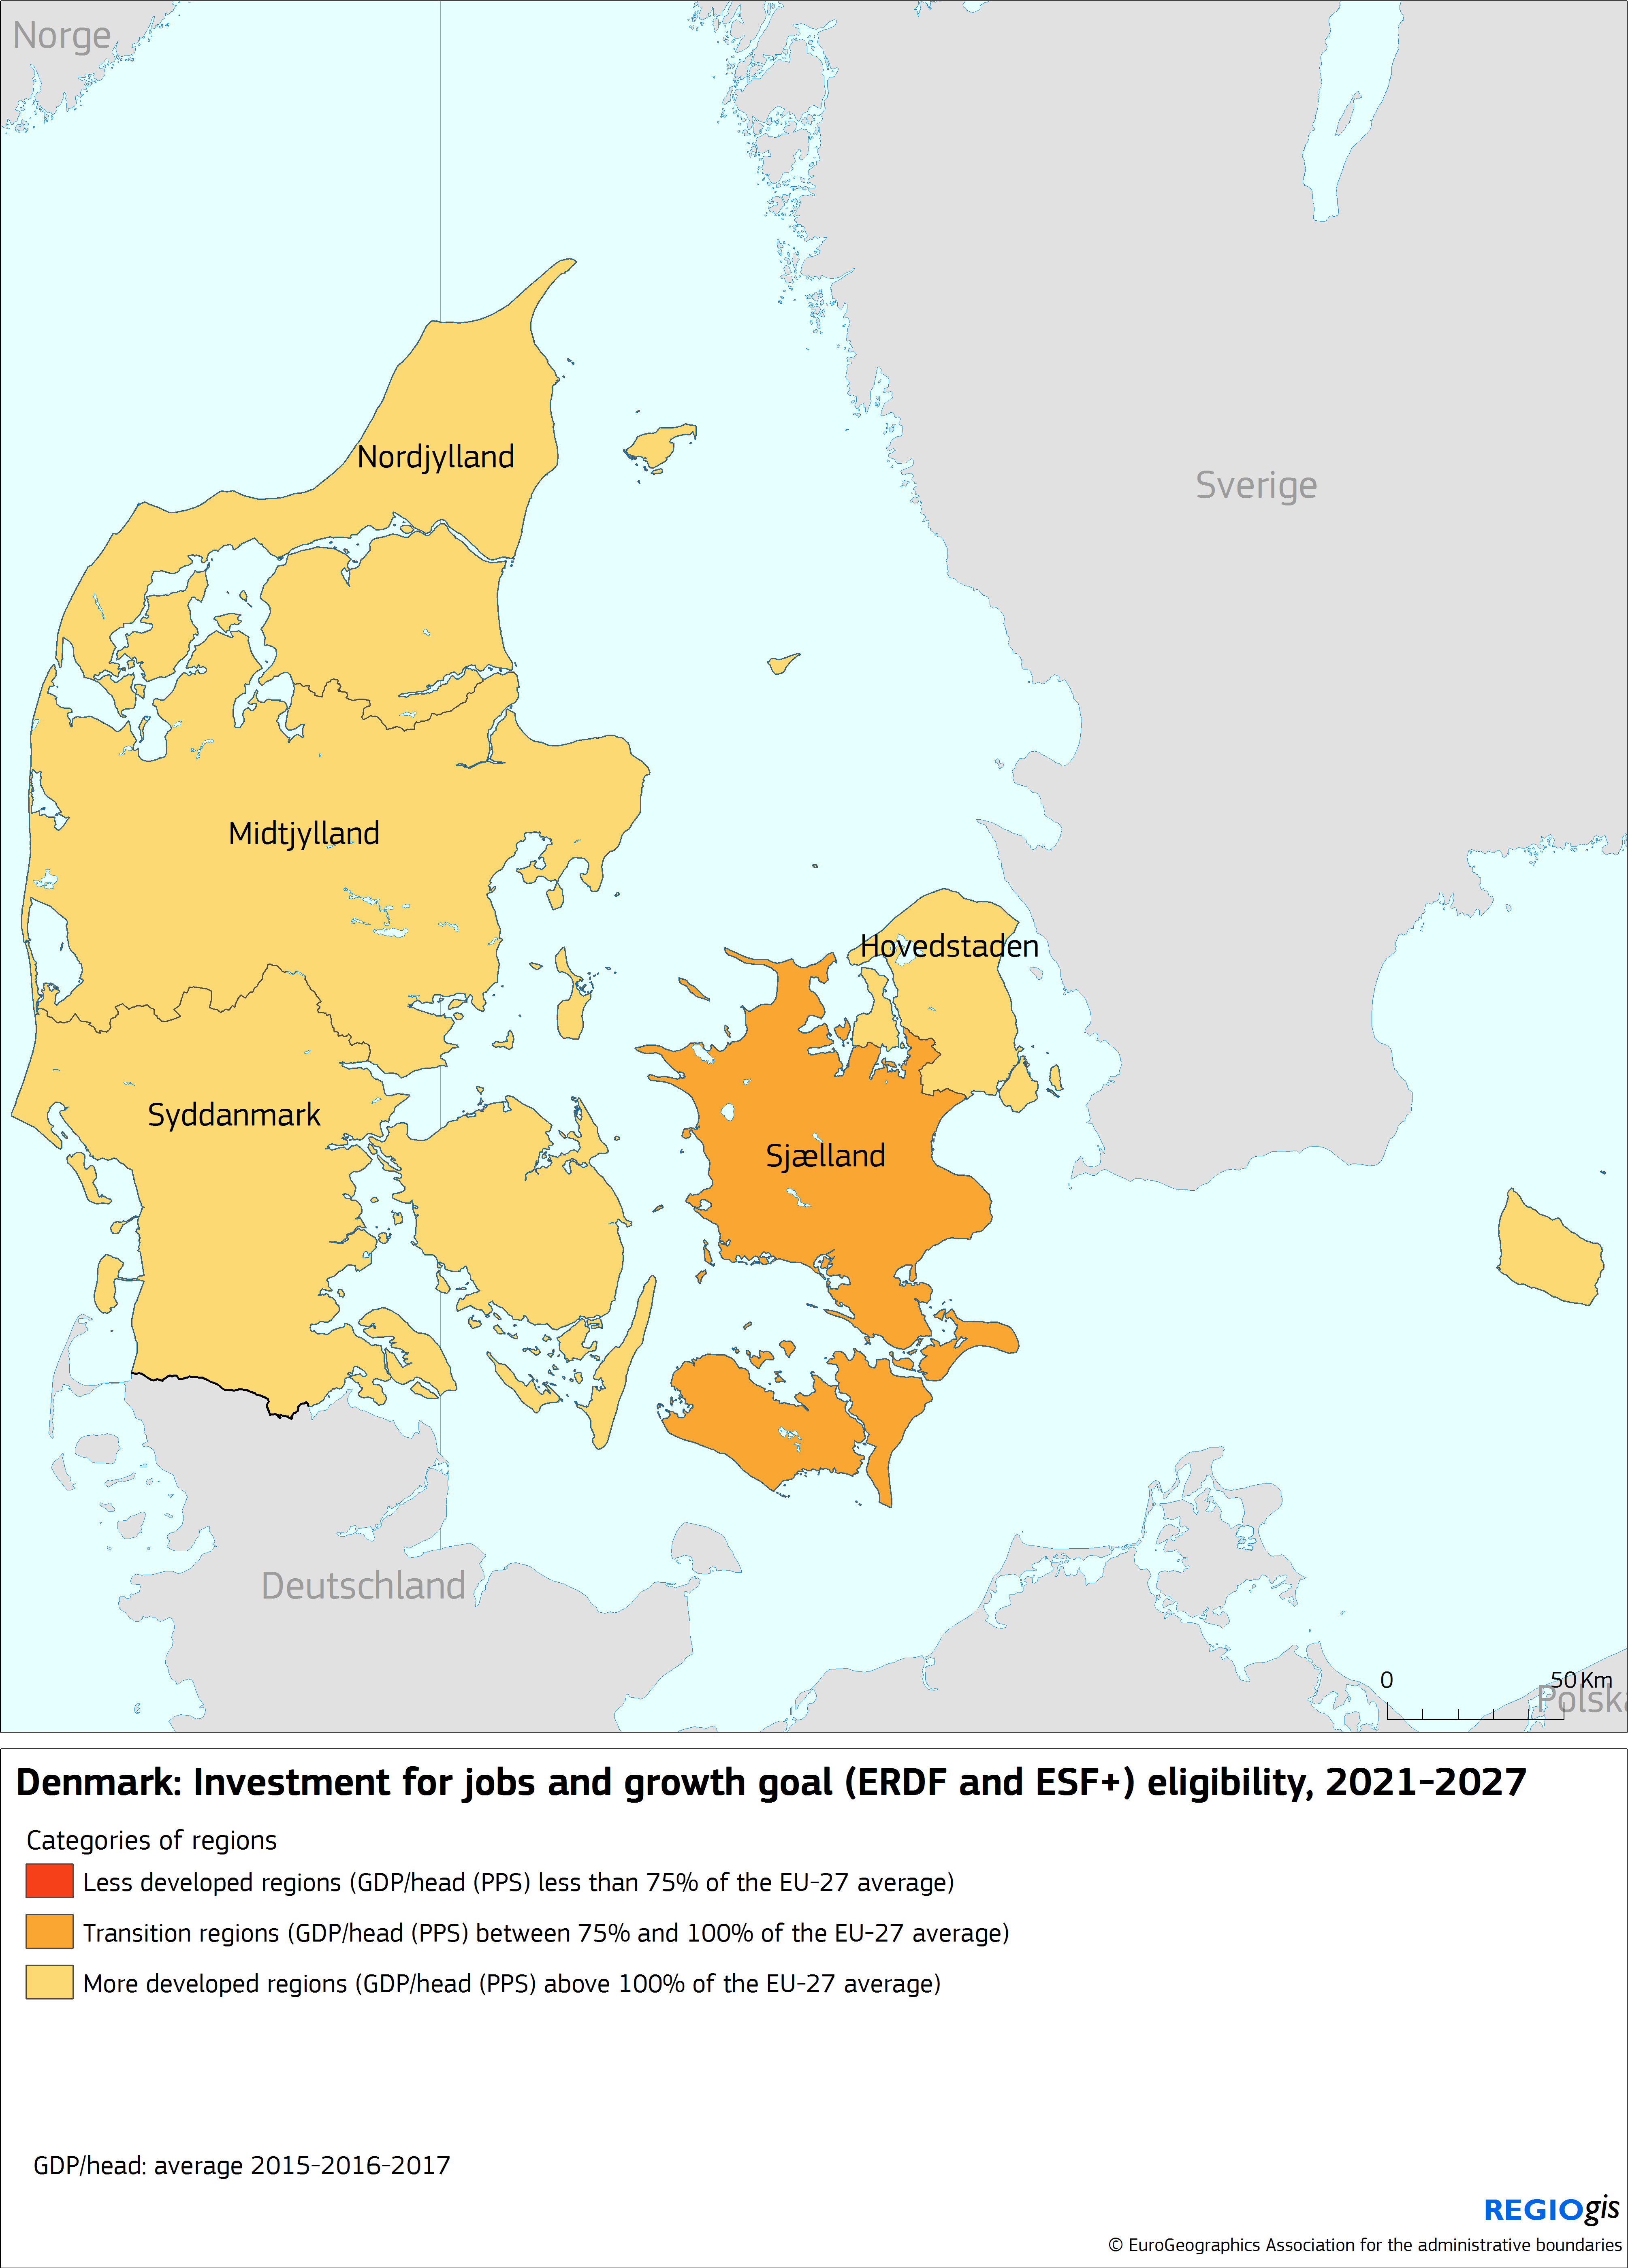 Structural Funds 2021-2027 (ERDF and ESF) eligibility: Denmark